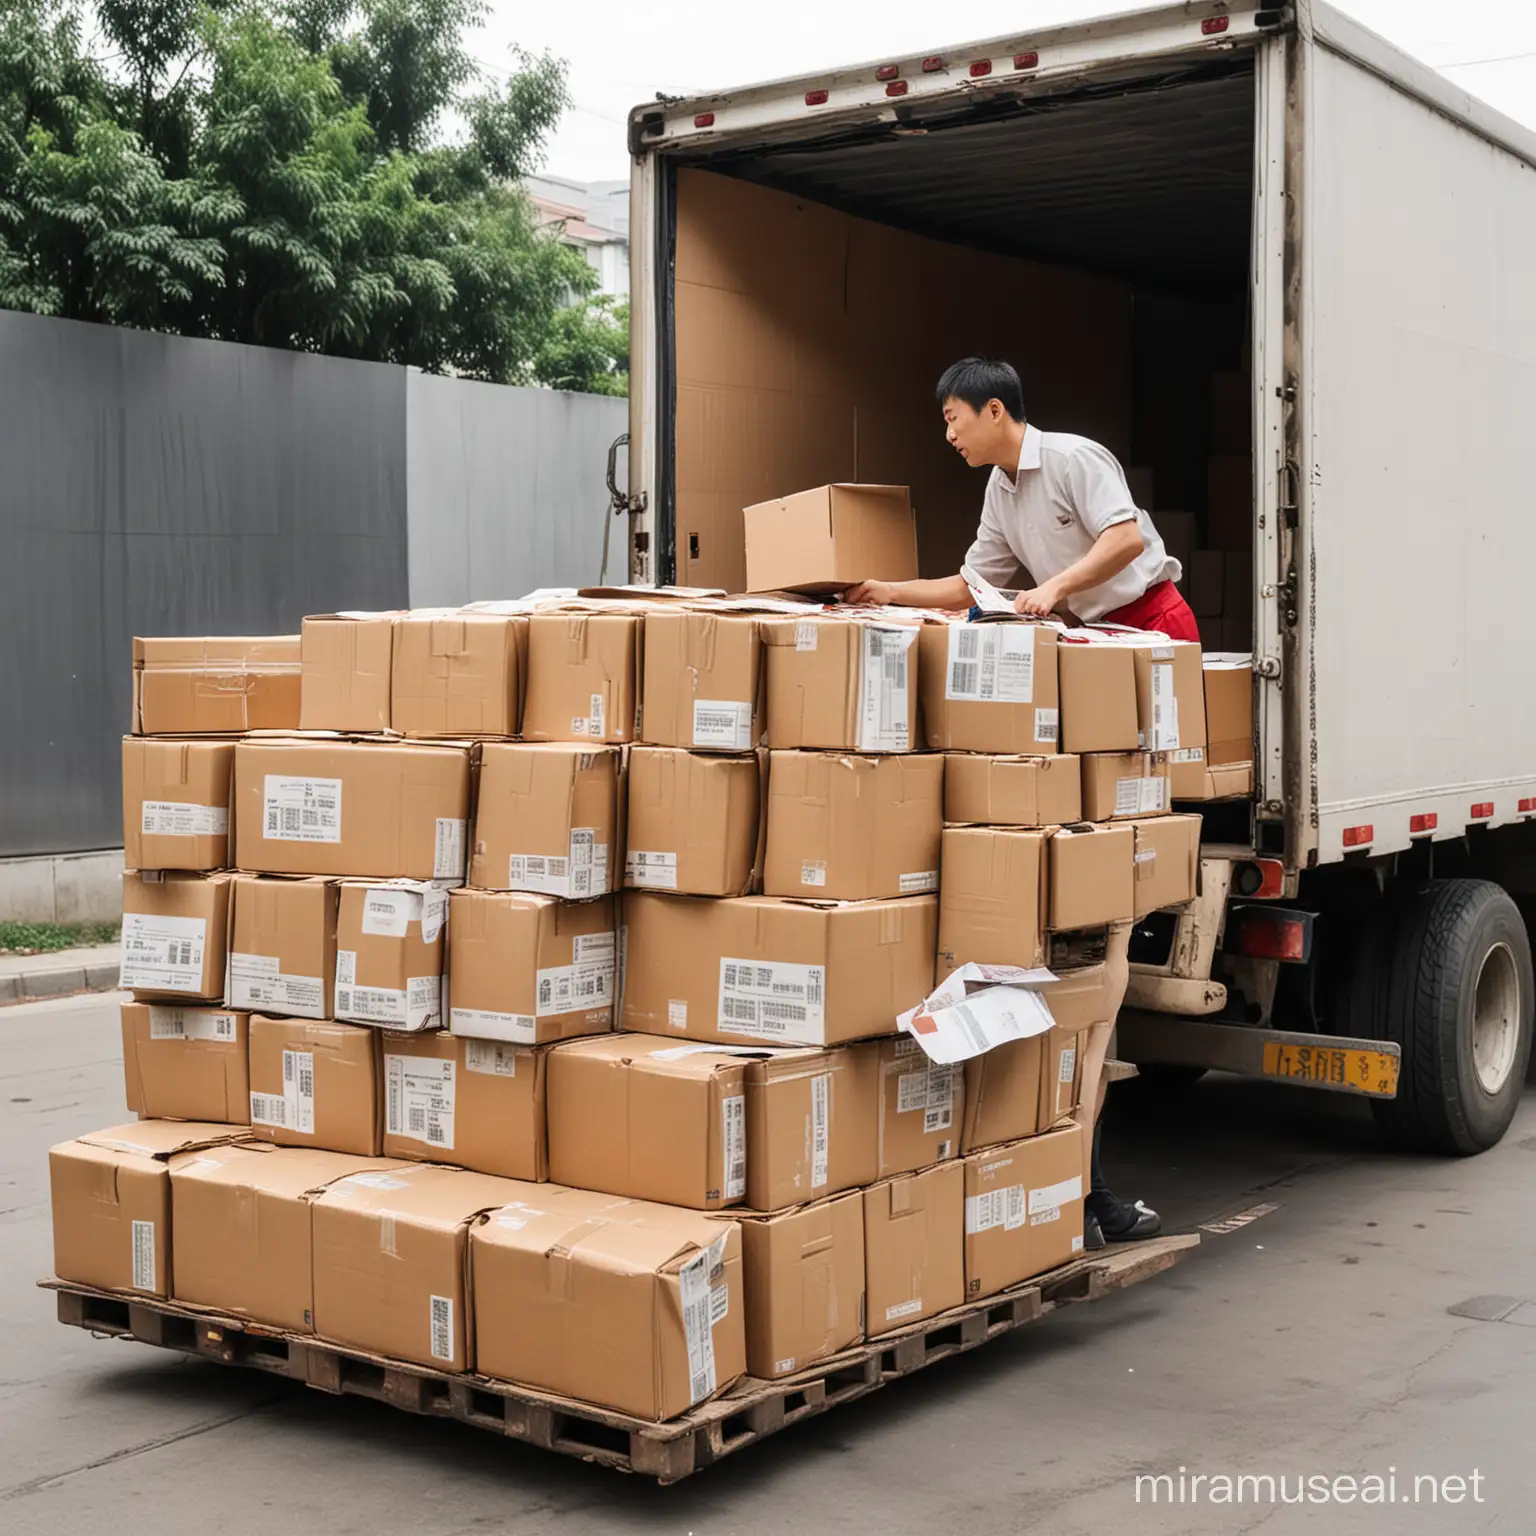 Chinese Worker Loading Truck with Delivery Boxes